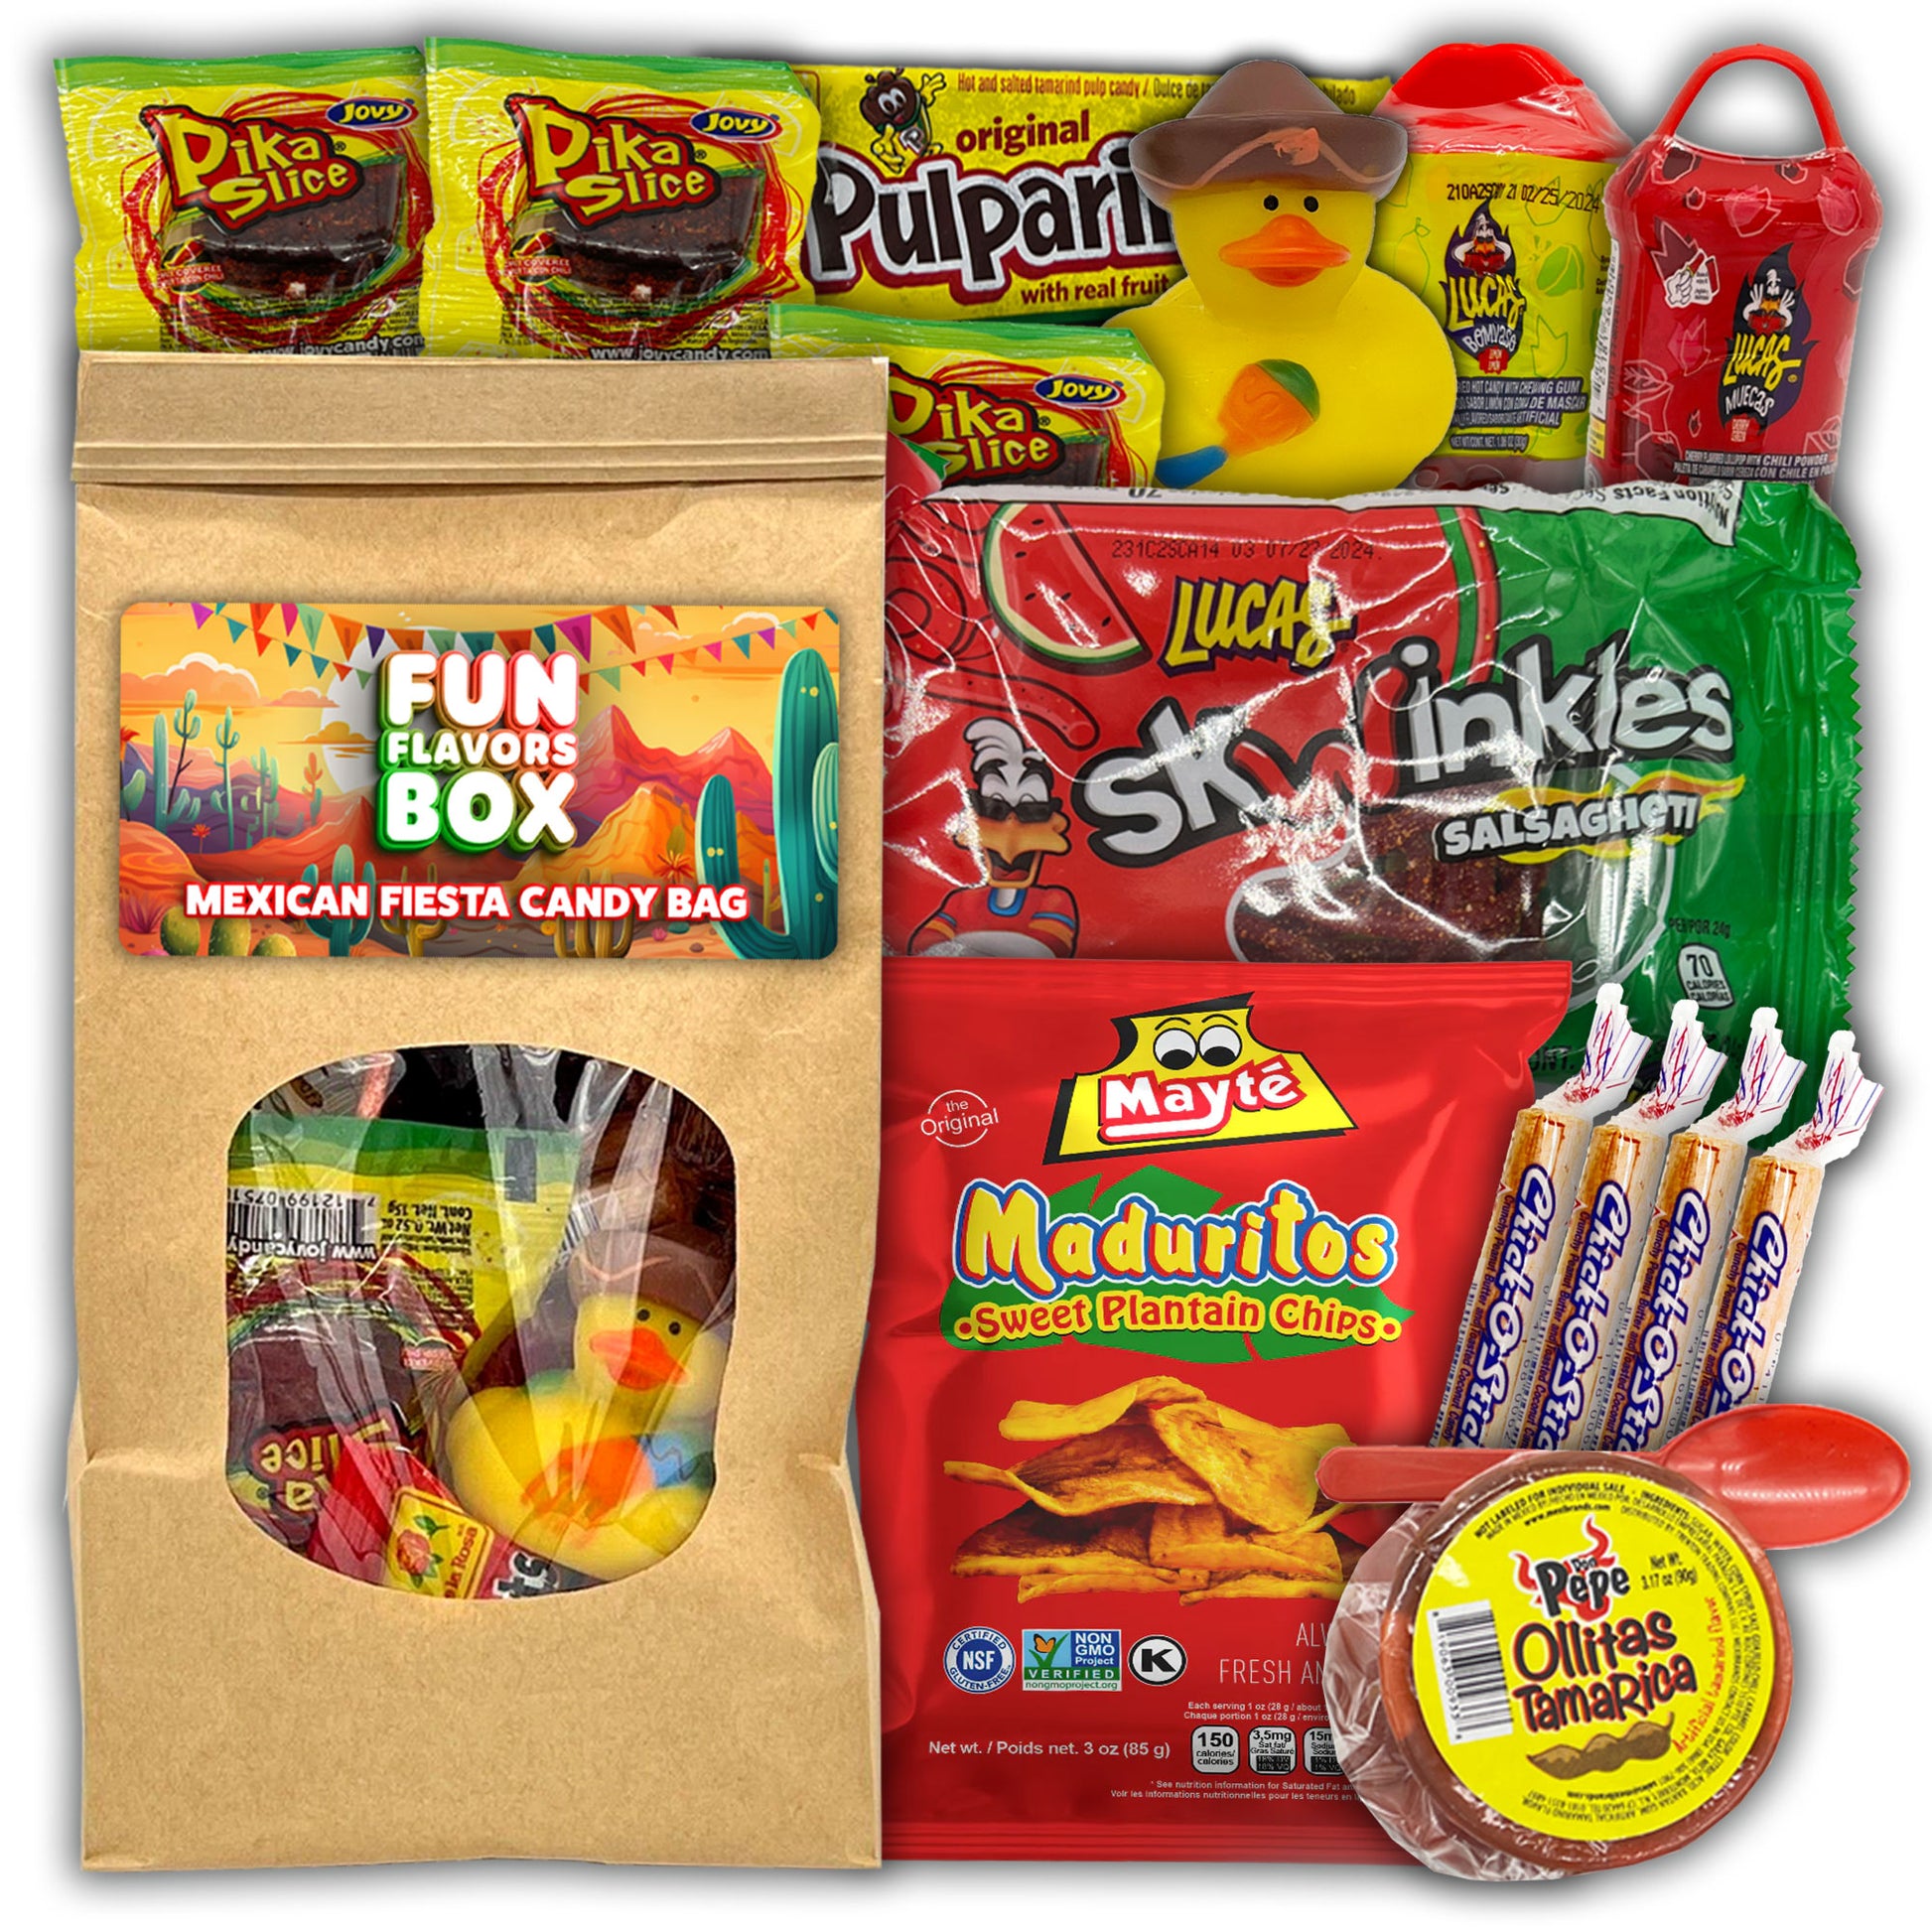 Fun Flavors Box Premium Sweet and Sour Candy Candy Snack Gift Box 30 Count